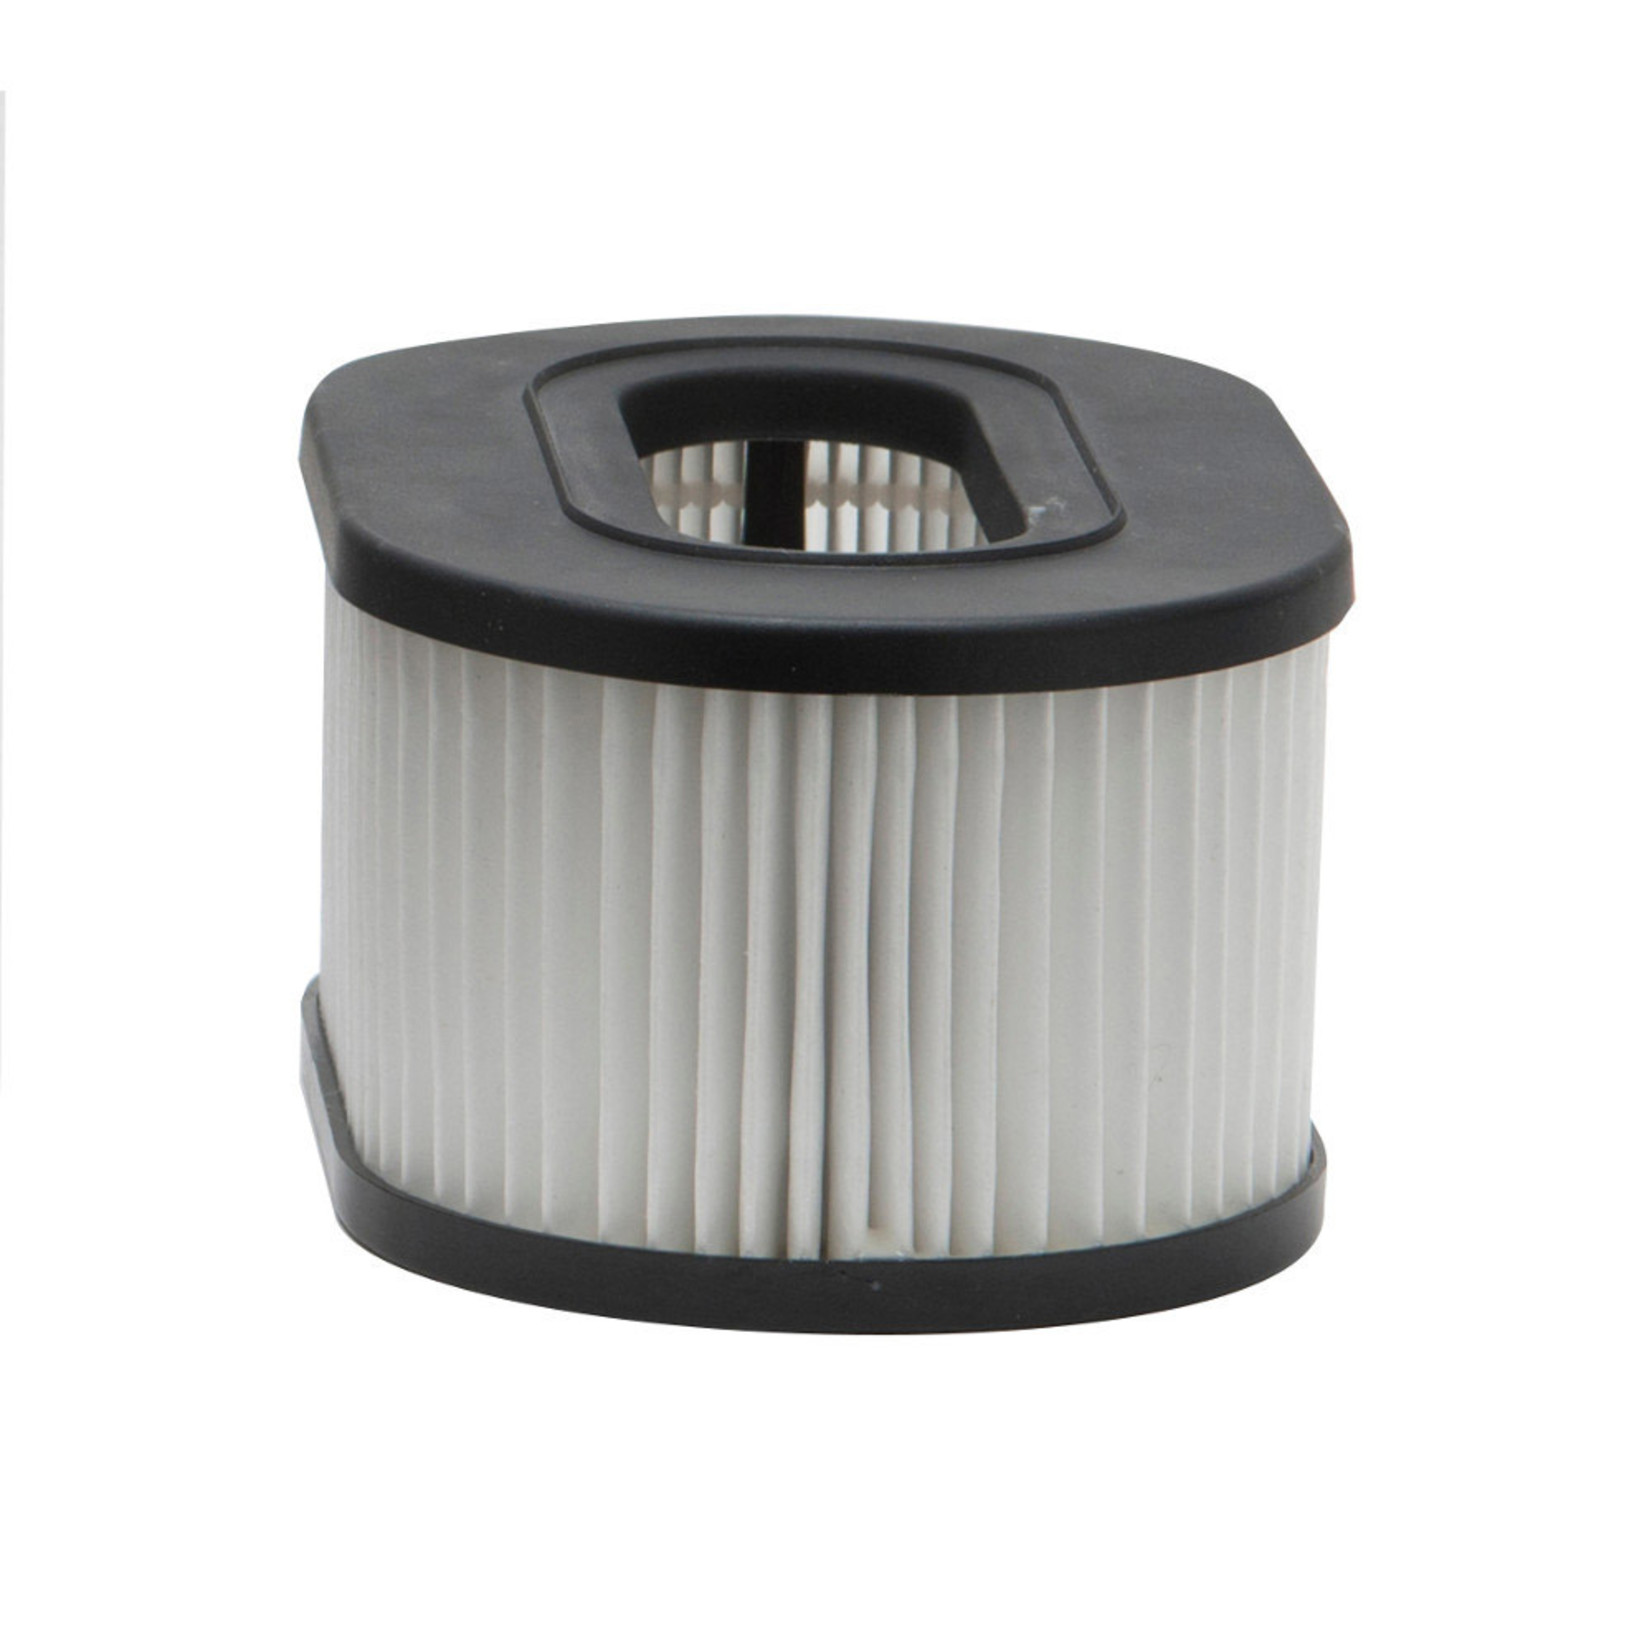 3M 3M Replacement Filter for Hoover Fold Away